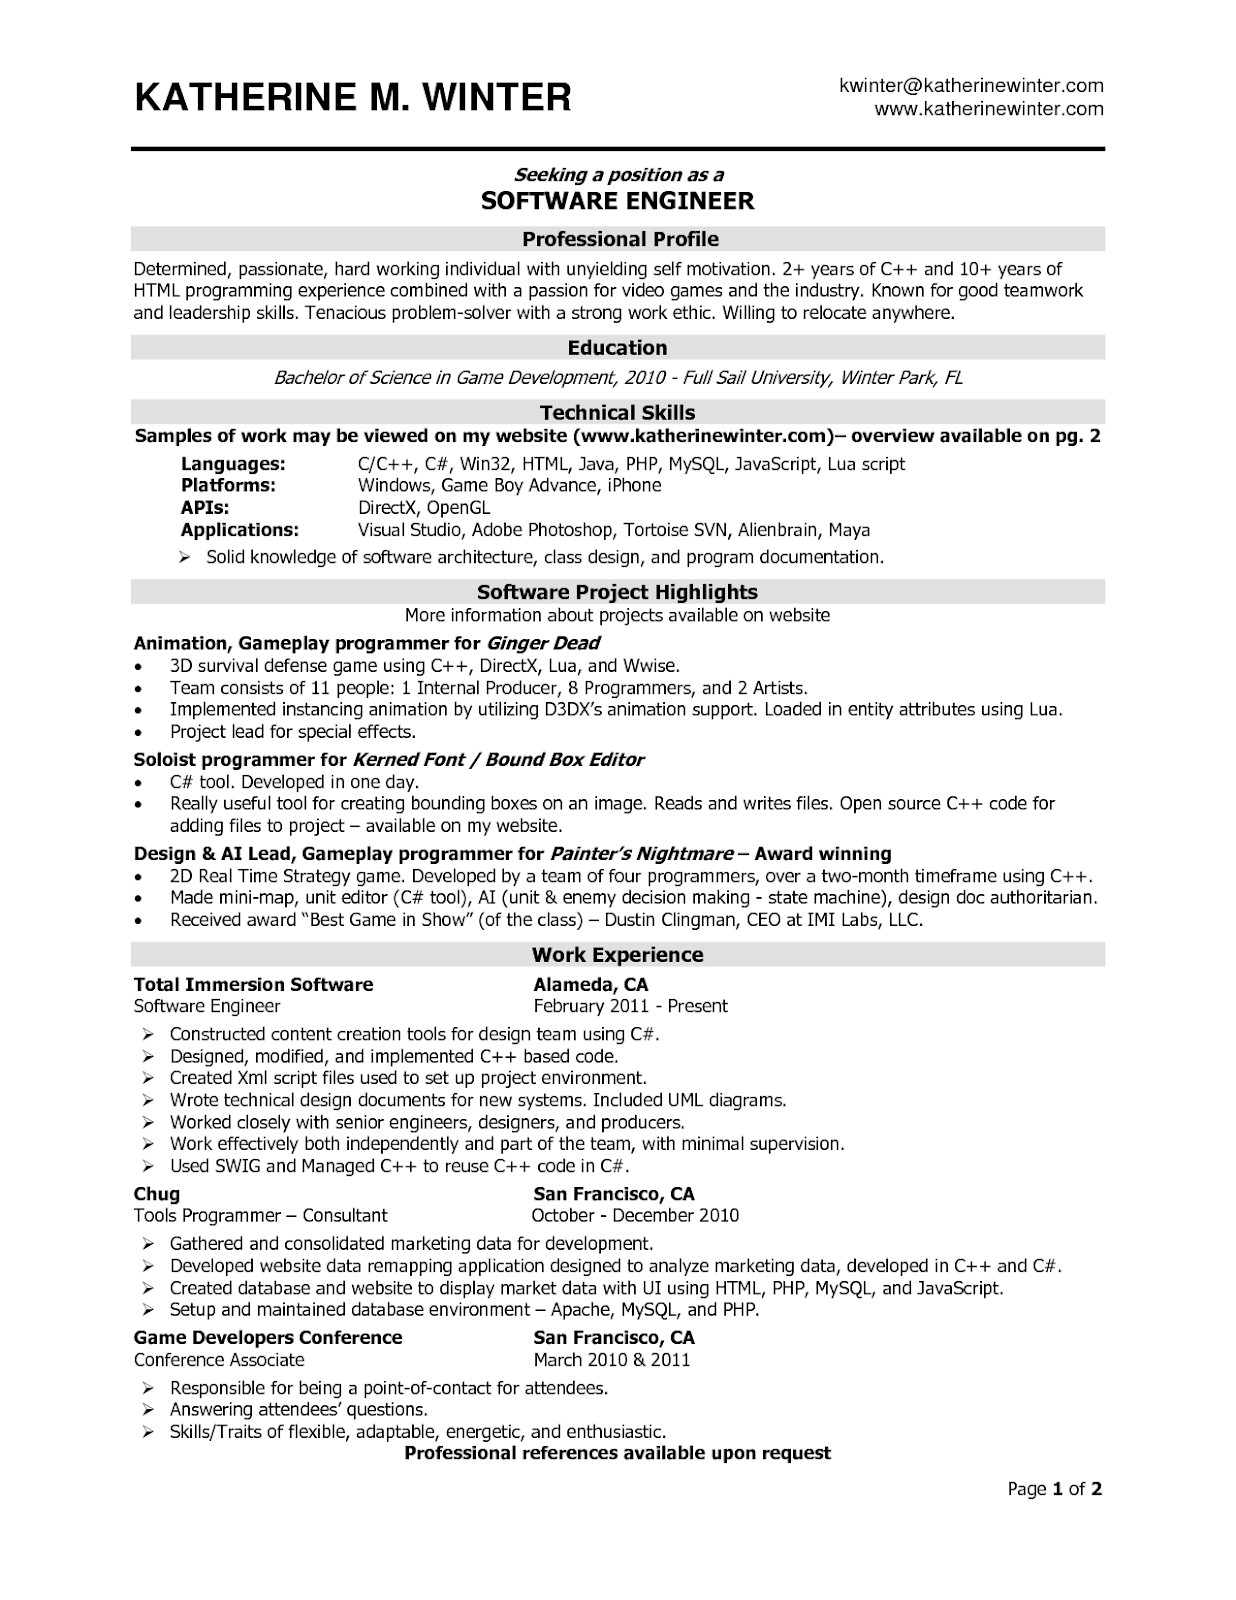 Sample Resume for Experienced software Engineer software Engineer Resume Samples